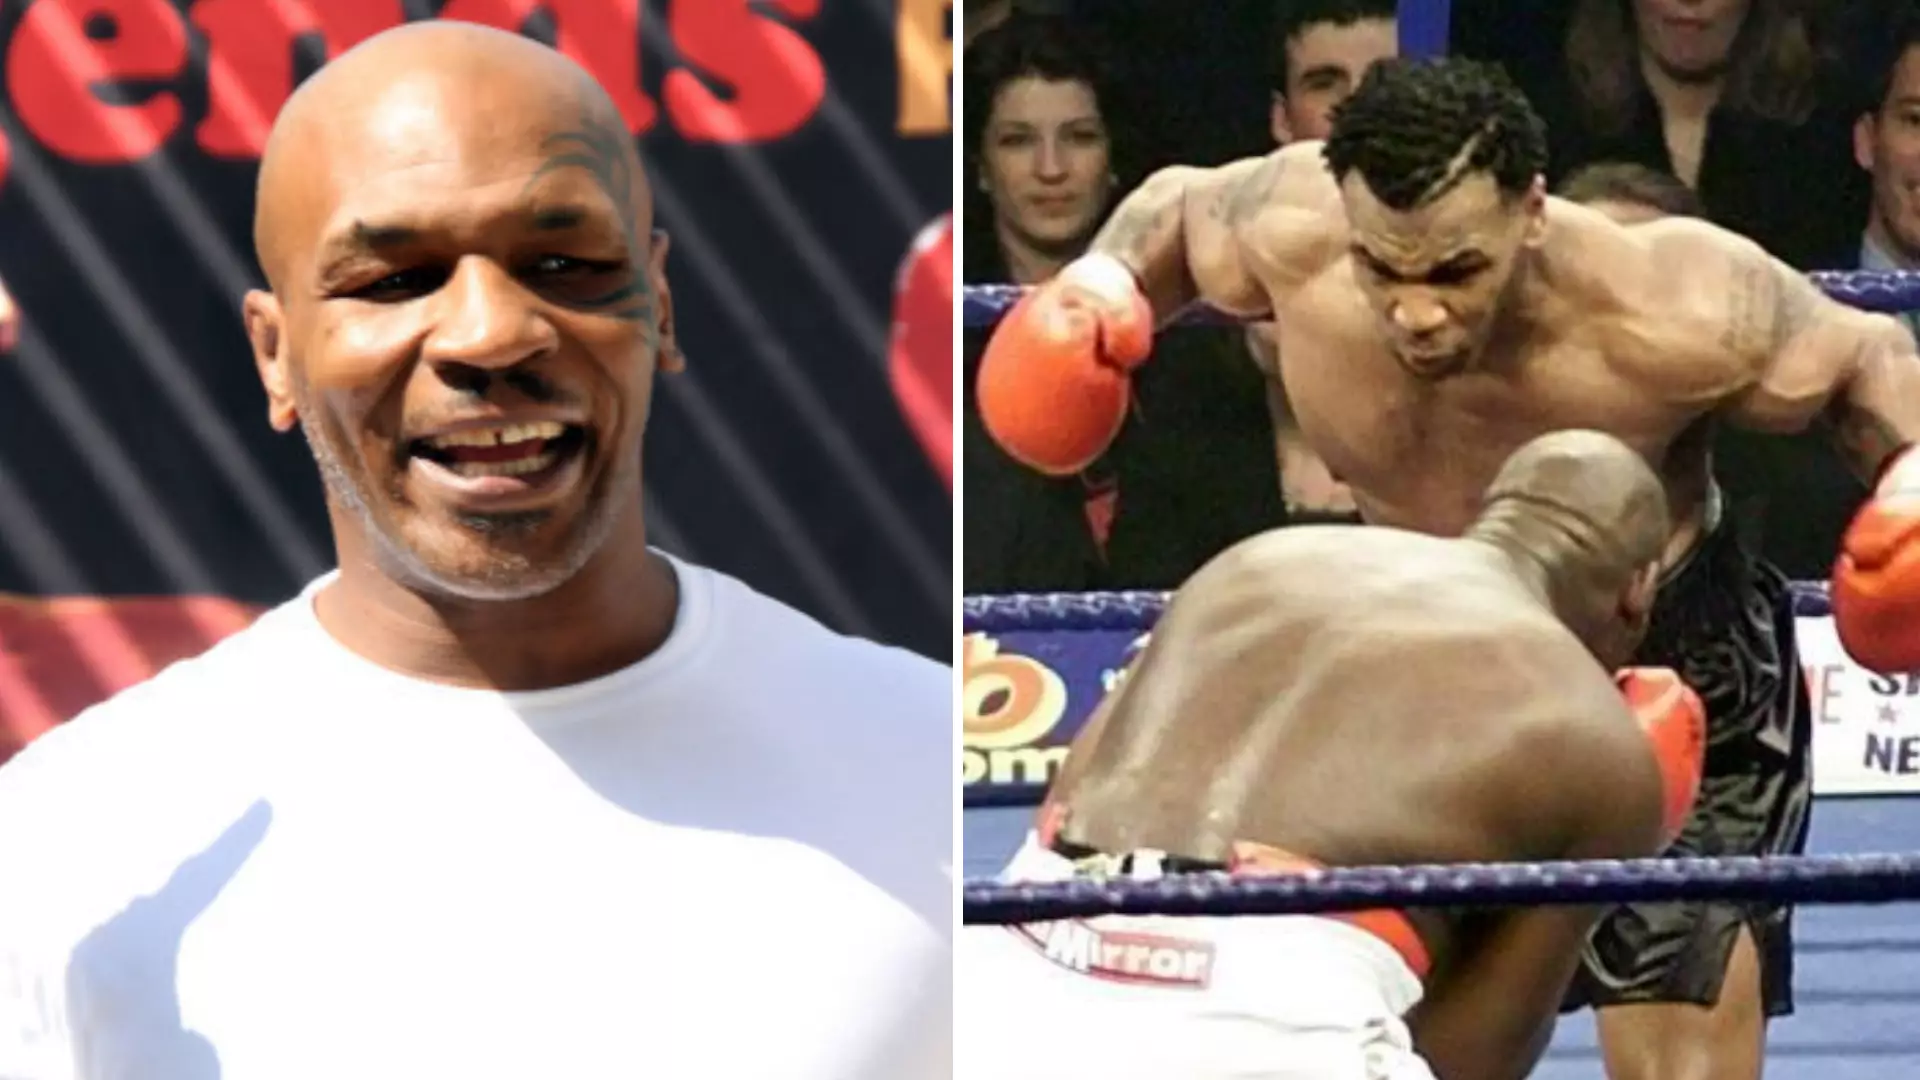 Mike Tyson Opens Up About The Biggest Regret In His Illustrious Boxing Career